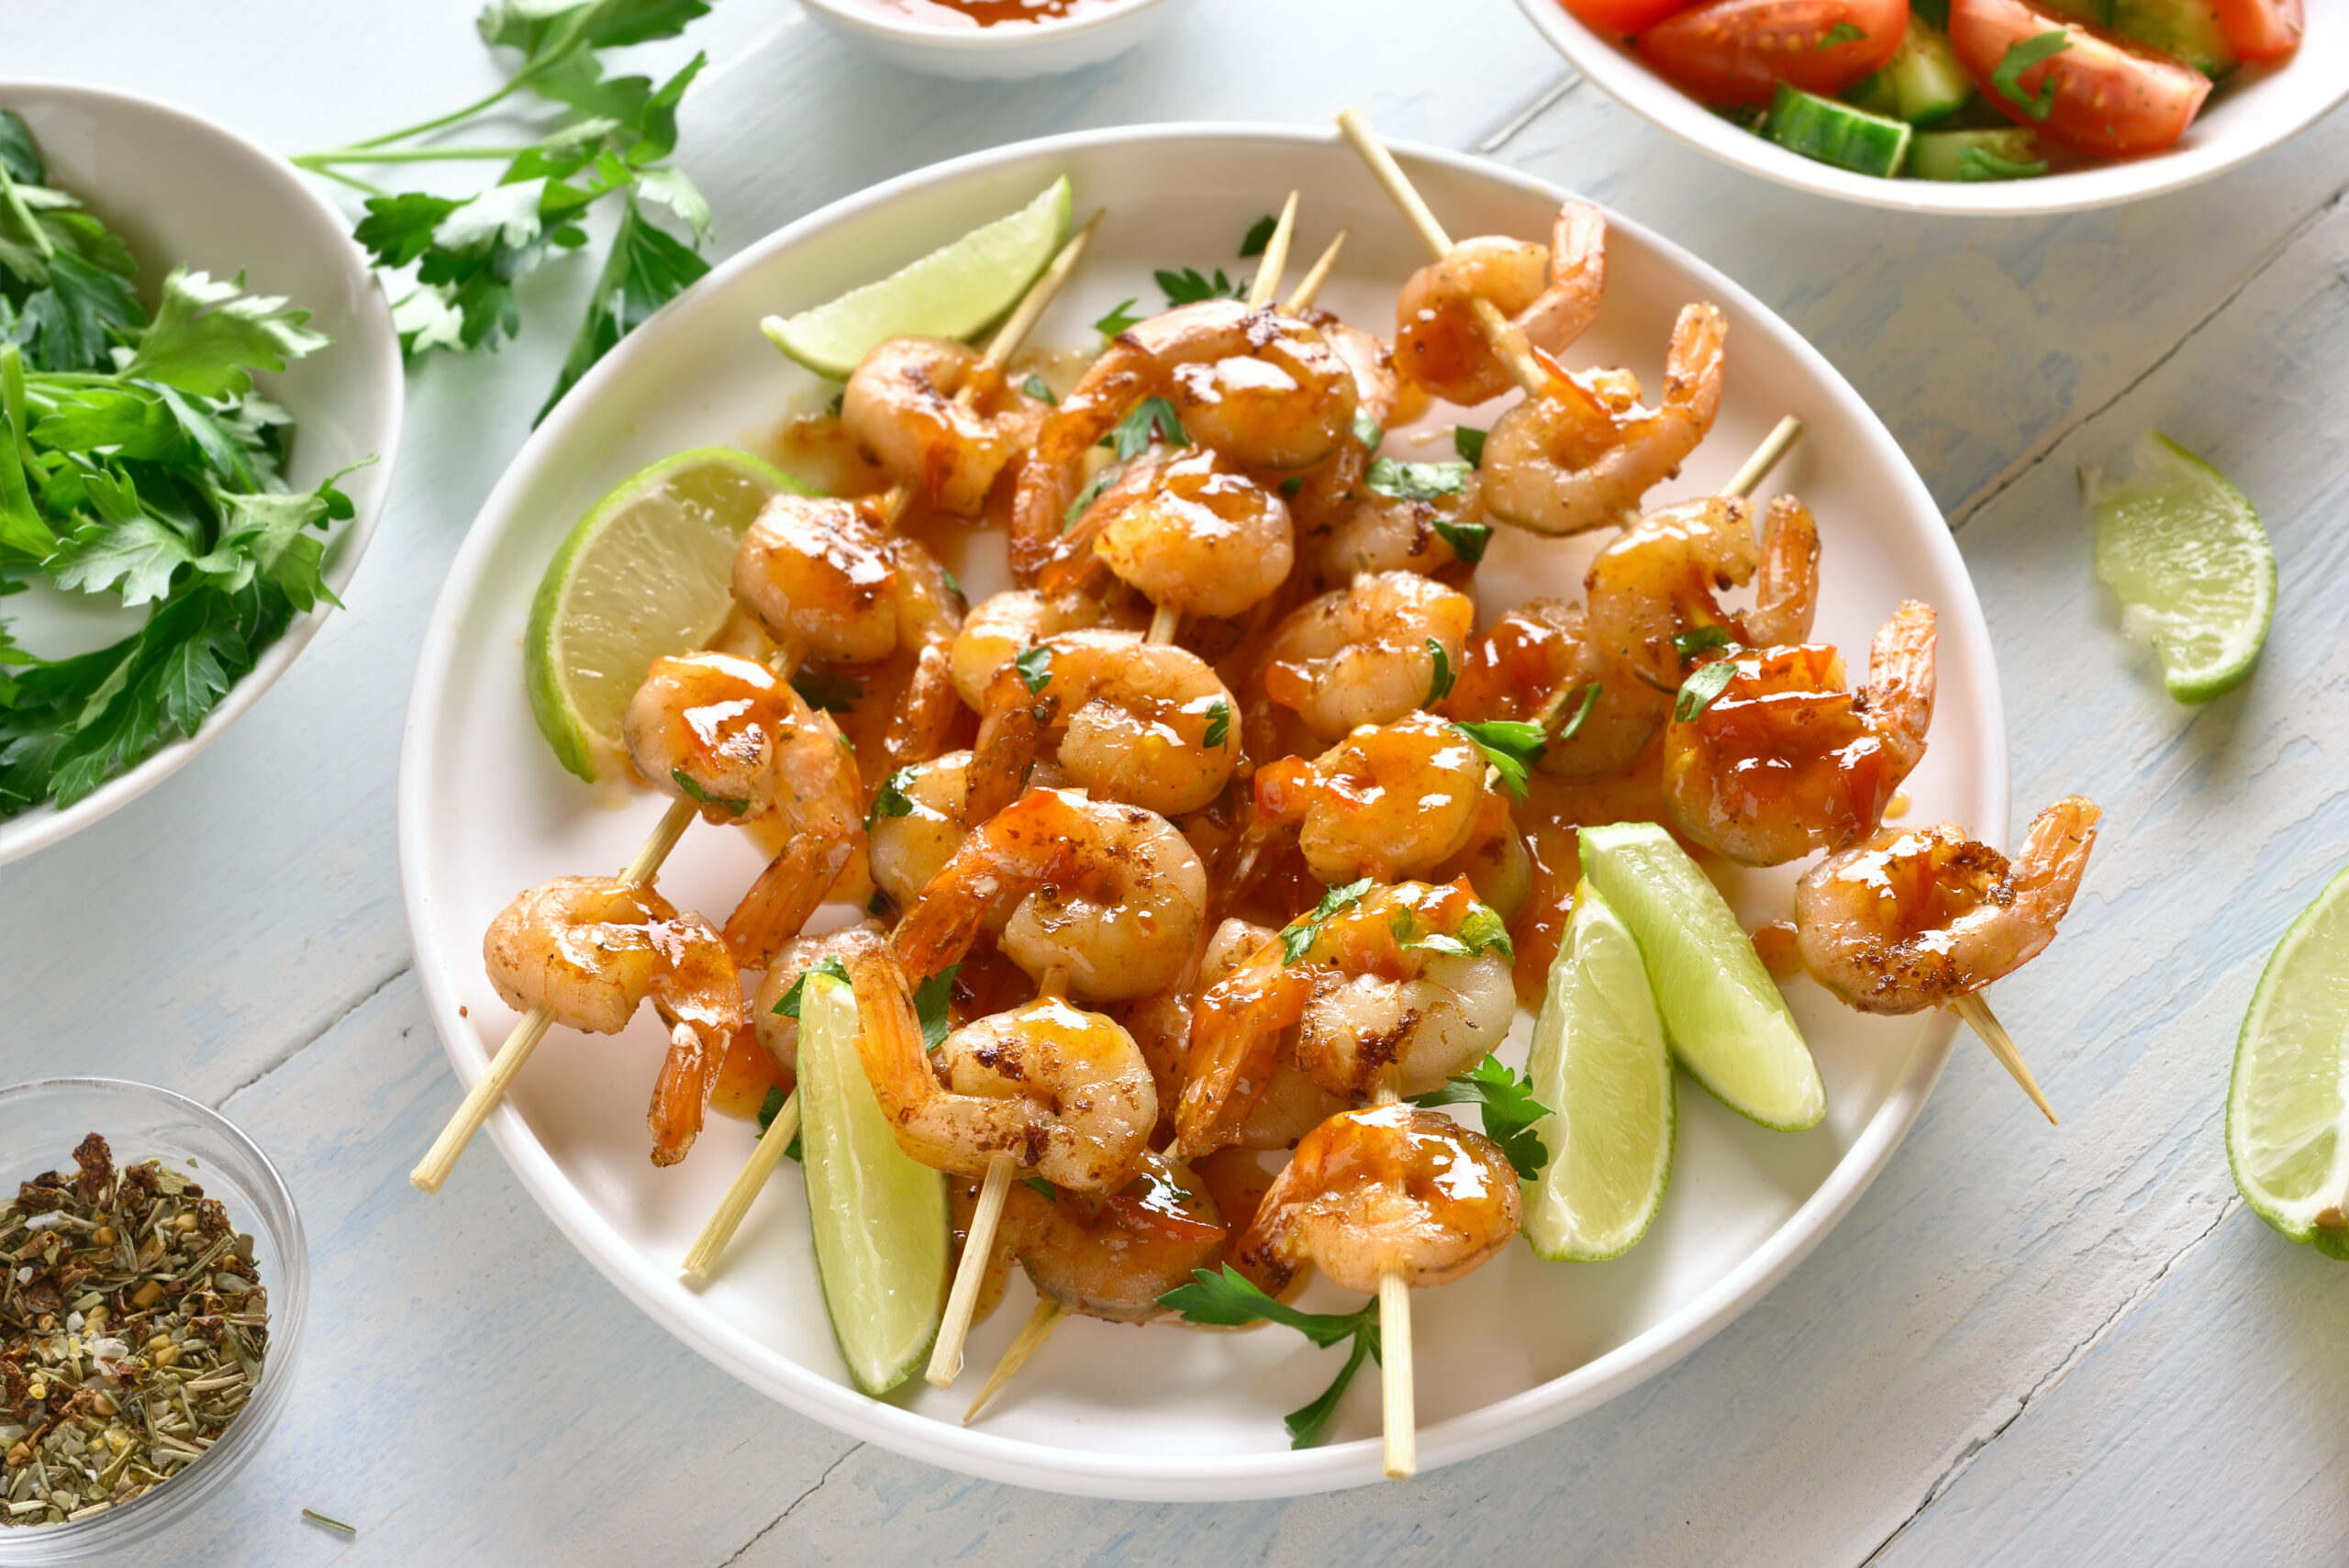 Prawns skewers with greens, spices, lime and sauce on white plate over wooden table. Grilled shrimp skewers. Tasty seafood.